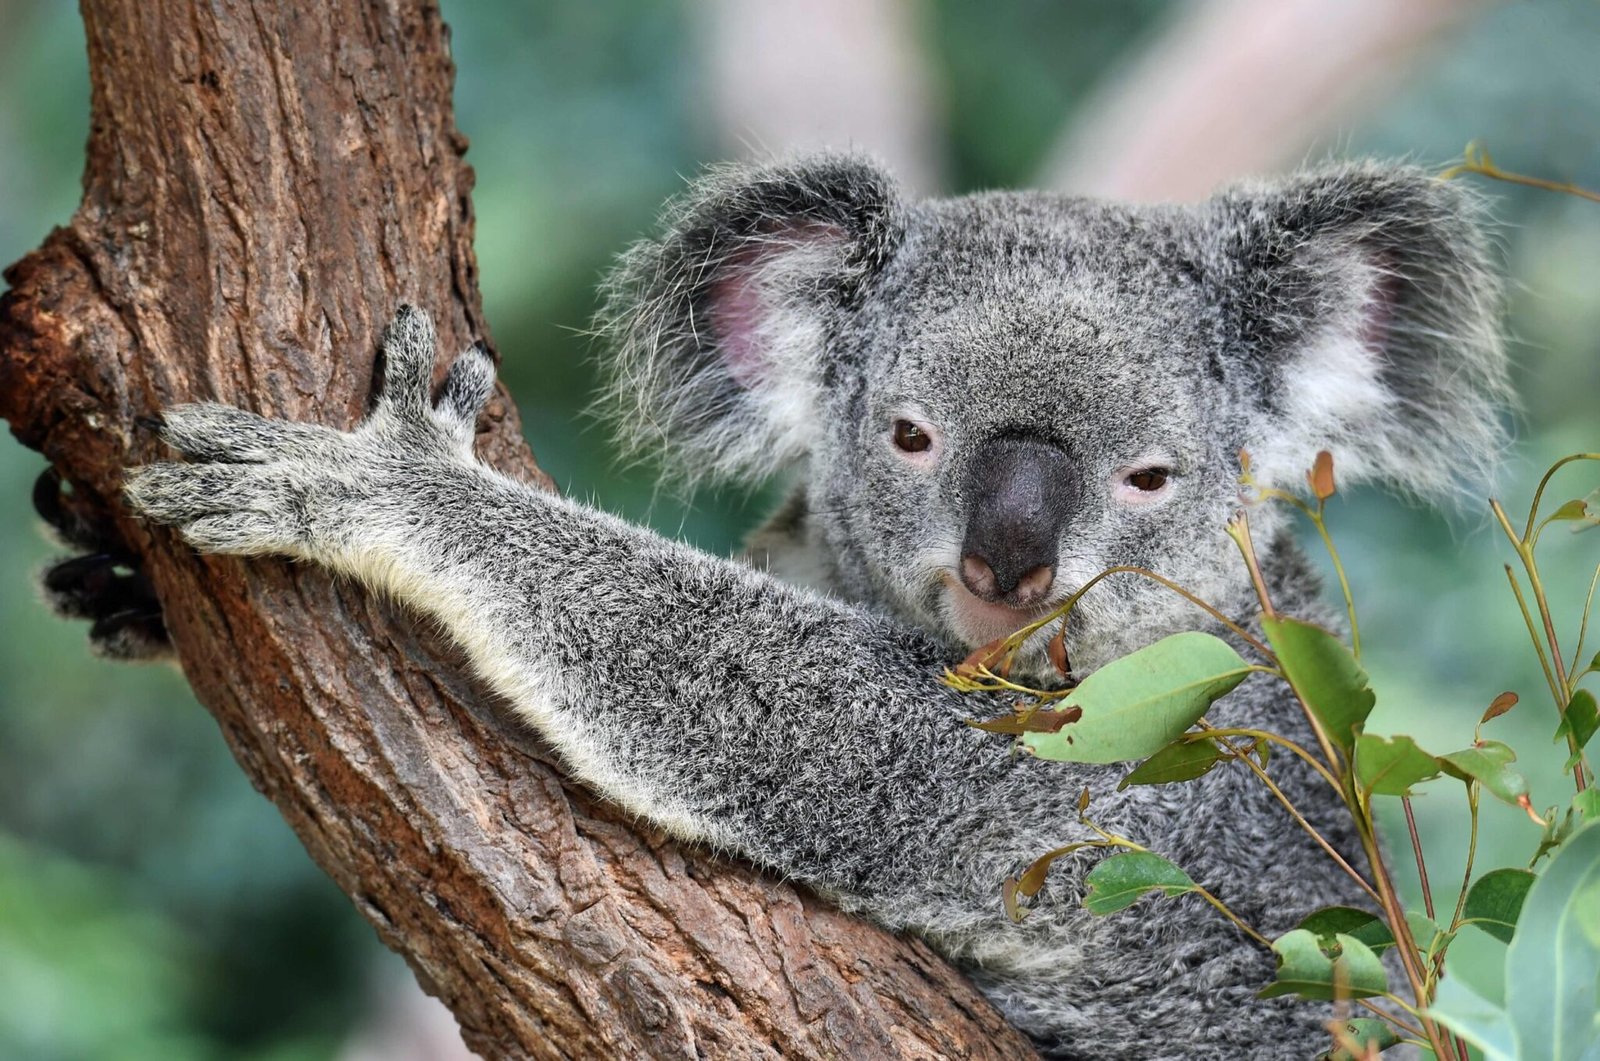 Australia's efforts to bring koalas back from the brink of extinction